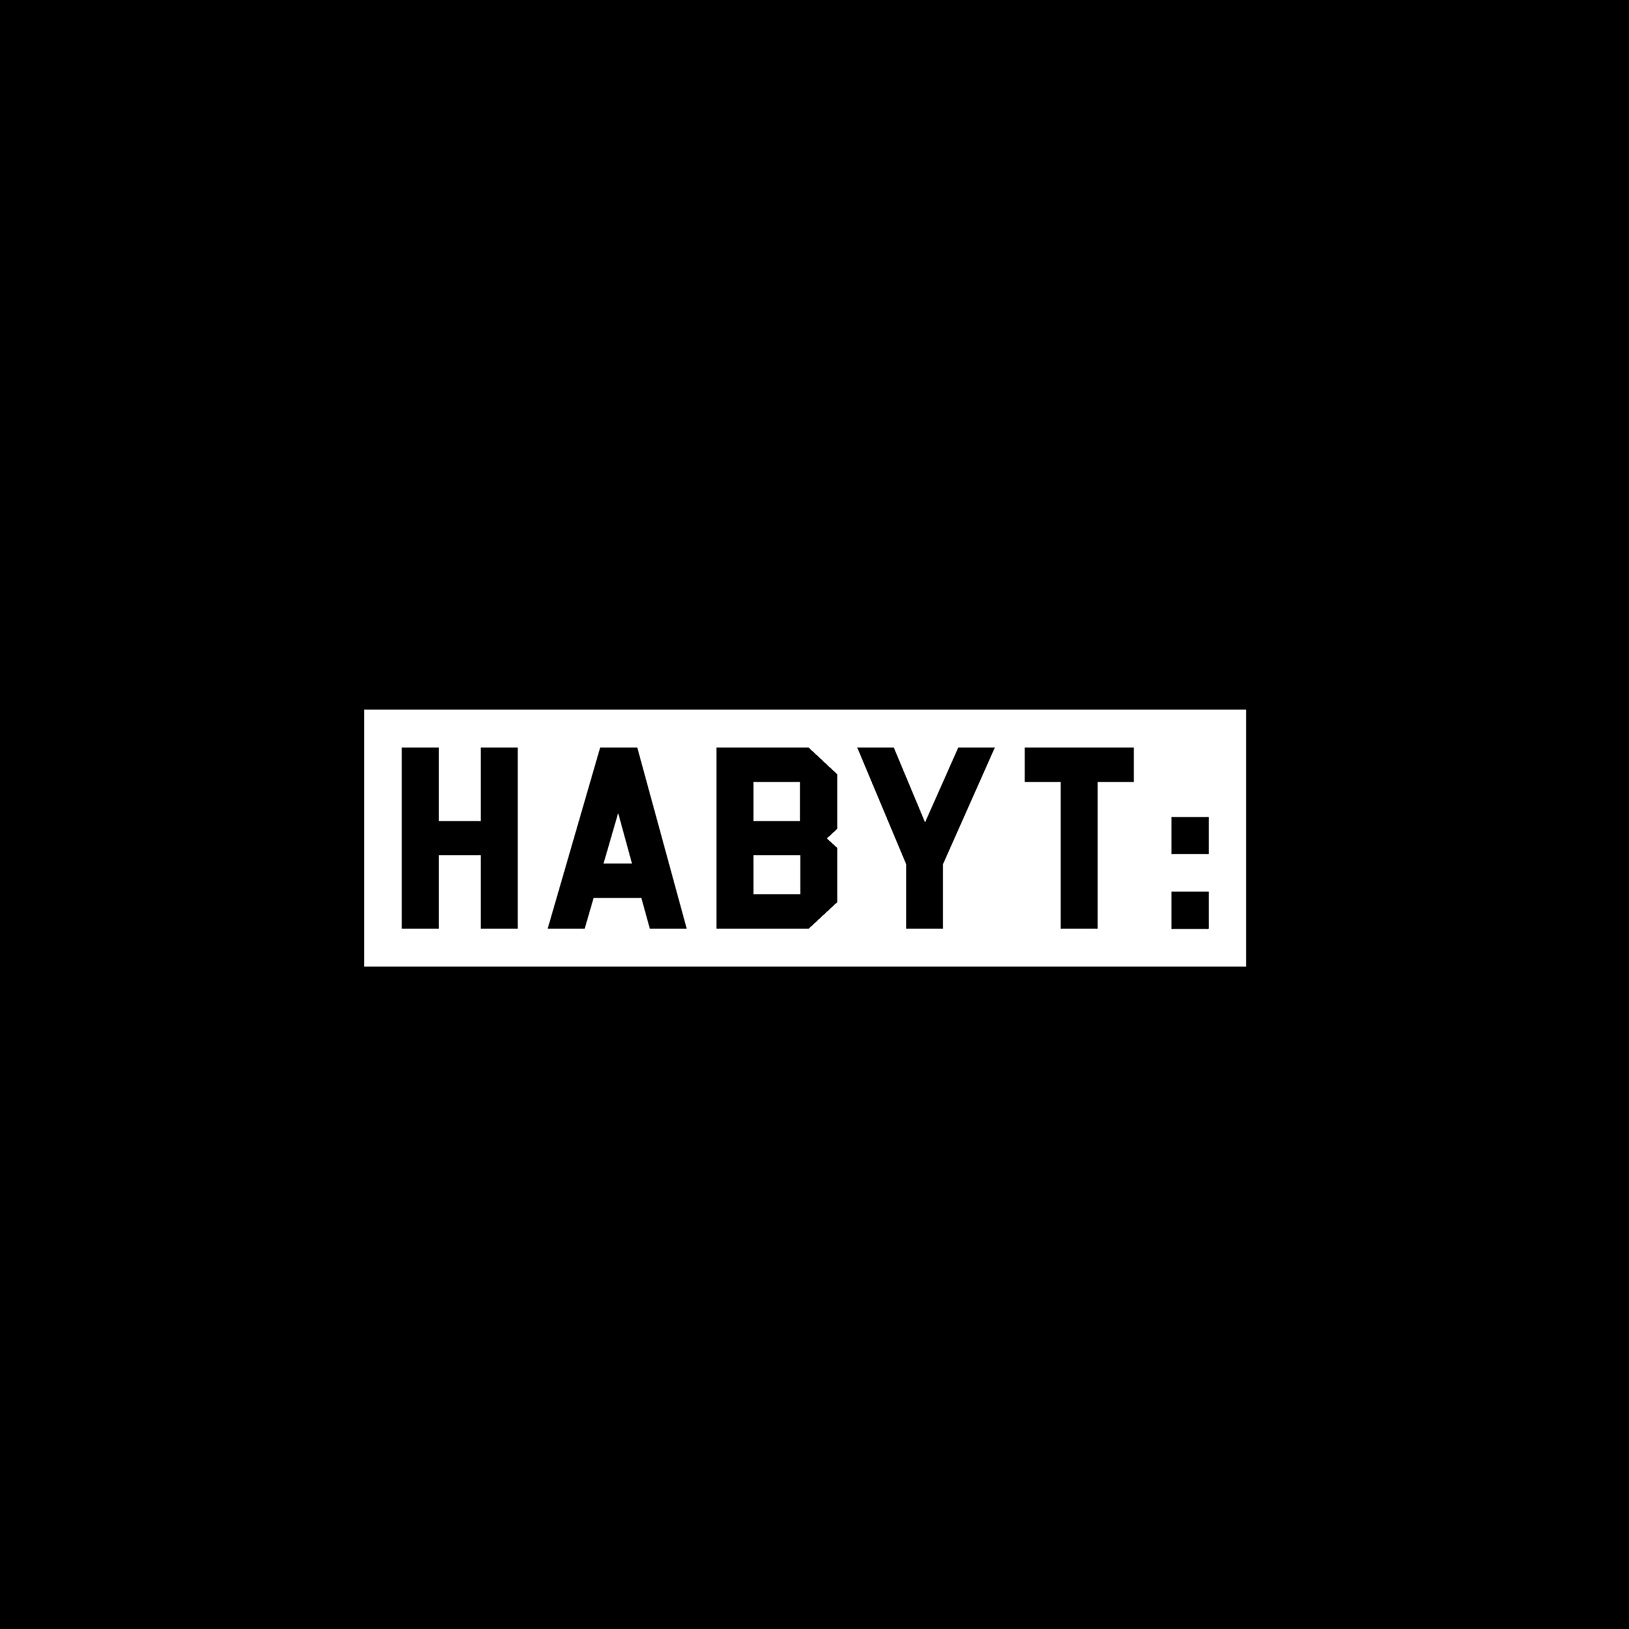 9-facts-about-habyt